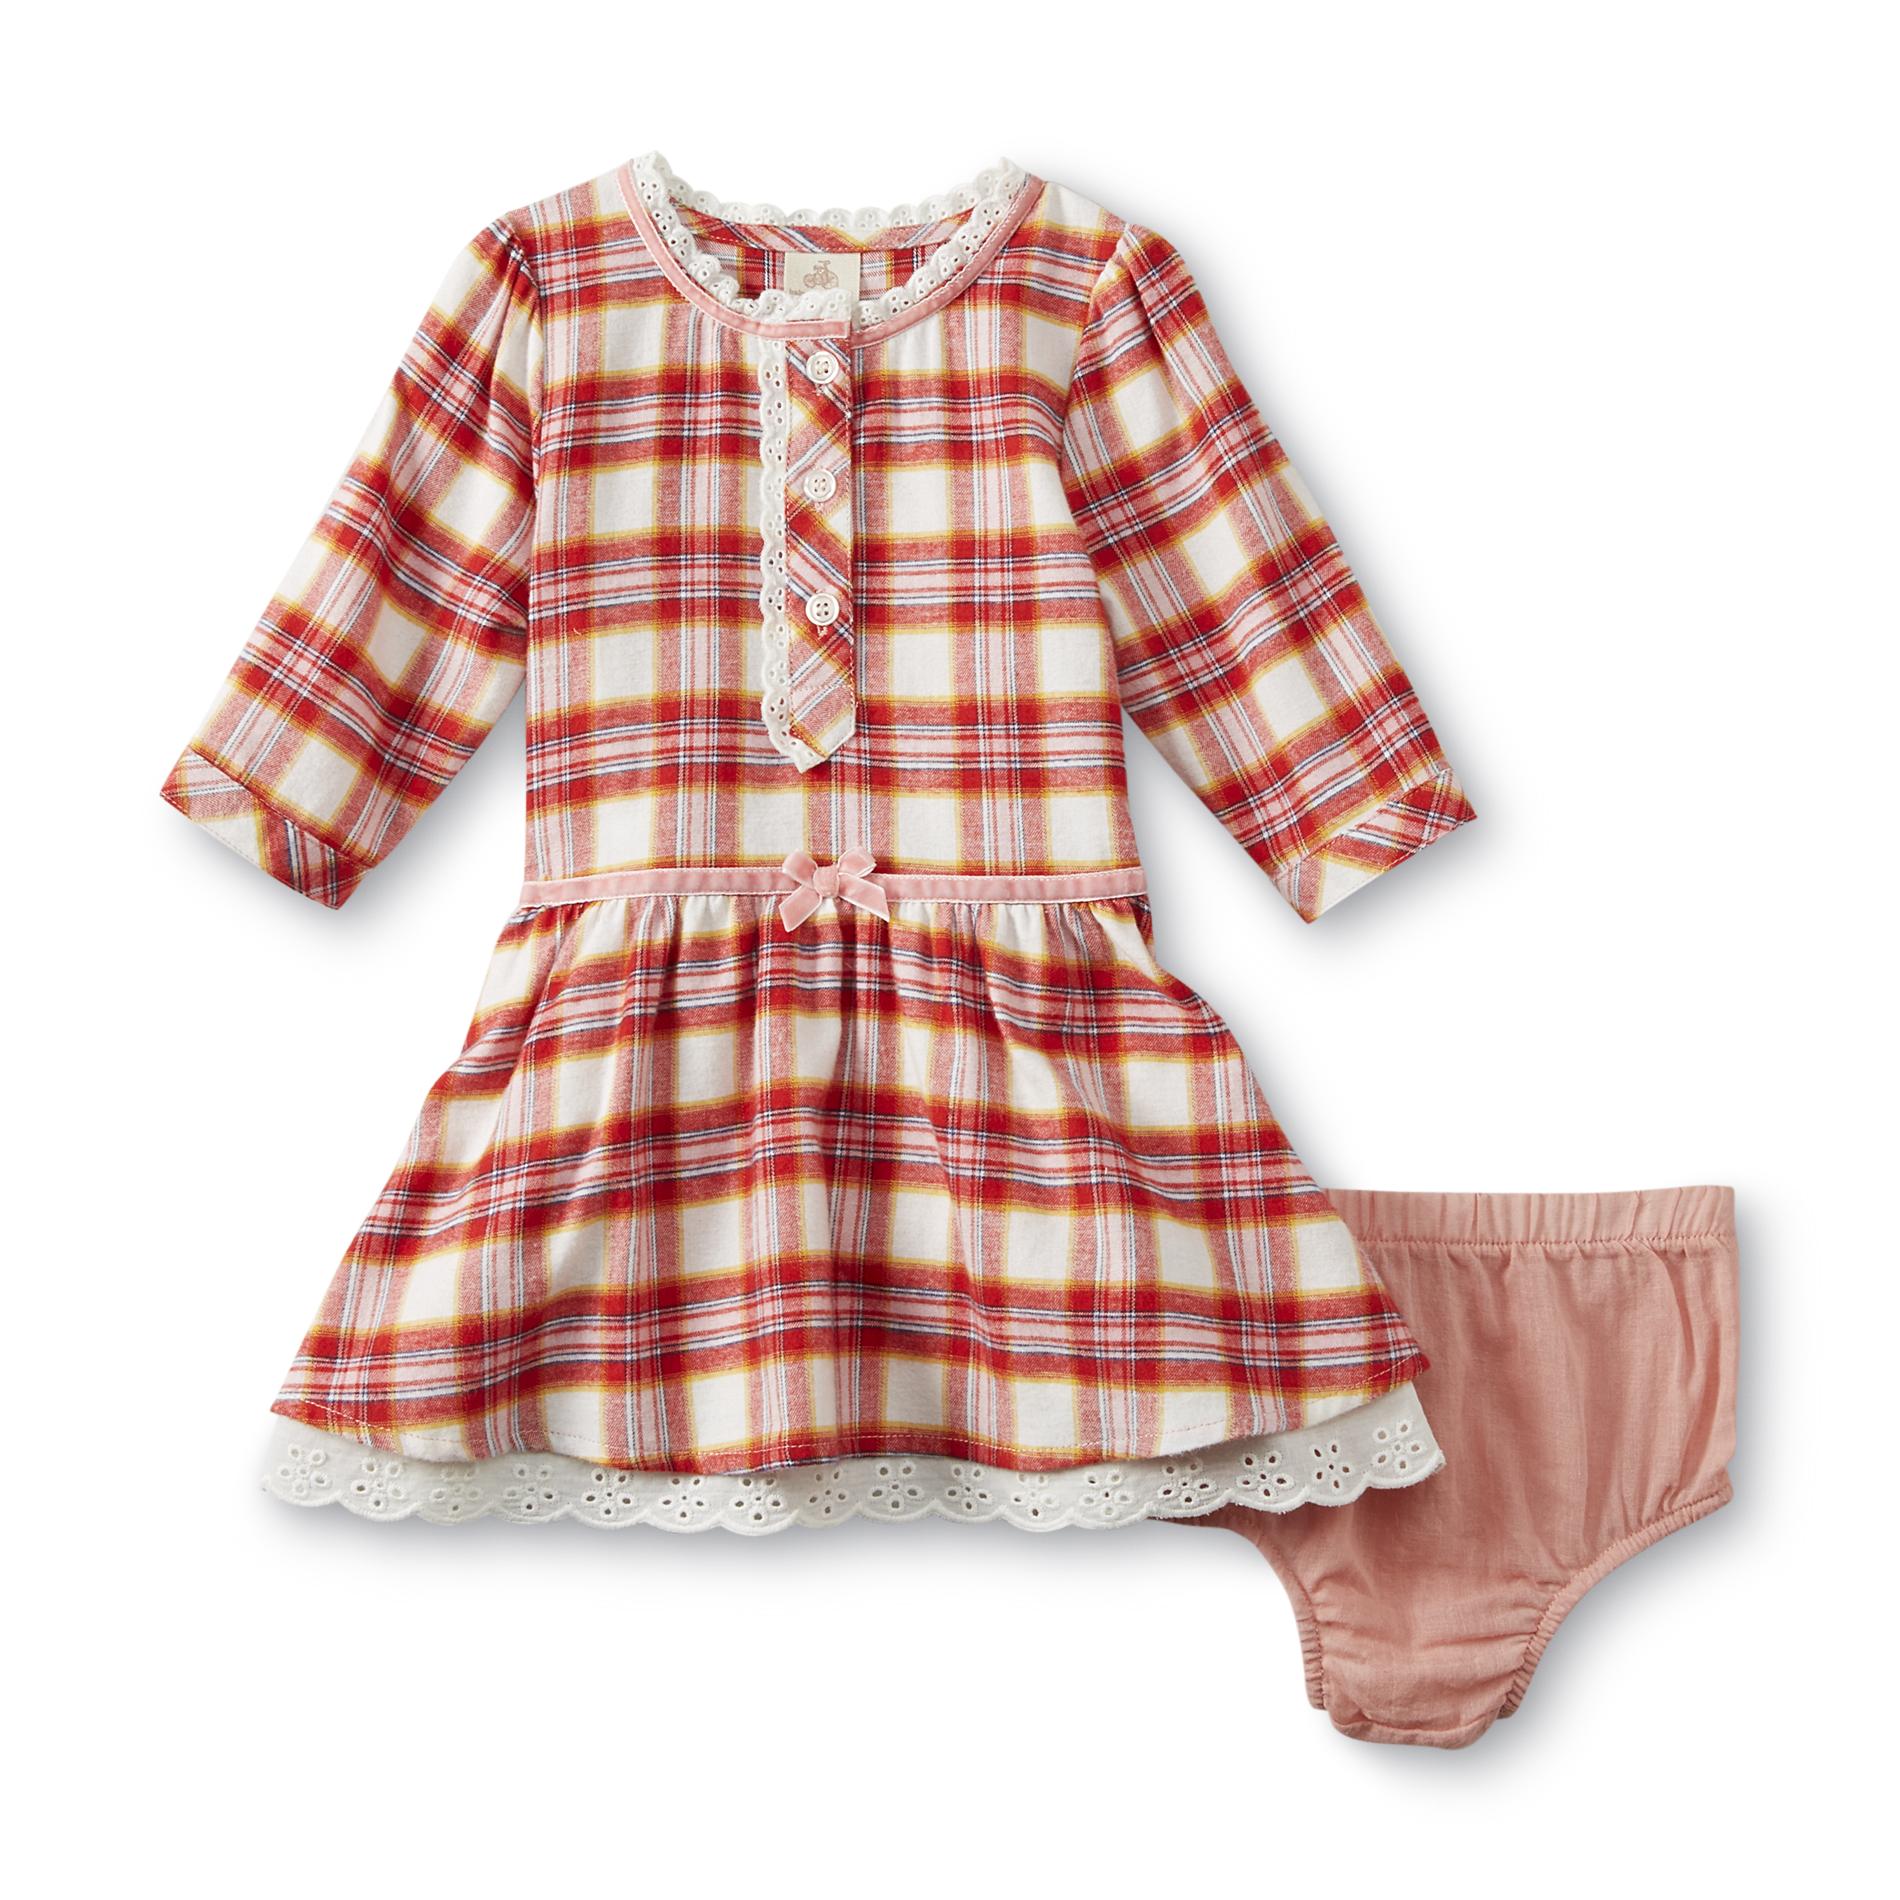 Route 66 Infant & Toddler Girl's Knit Dress & Diaper Cover - Plaid